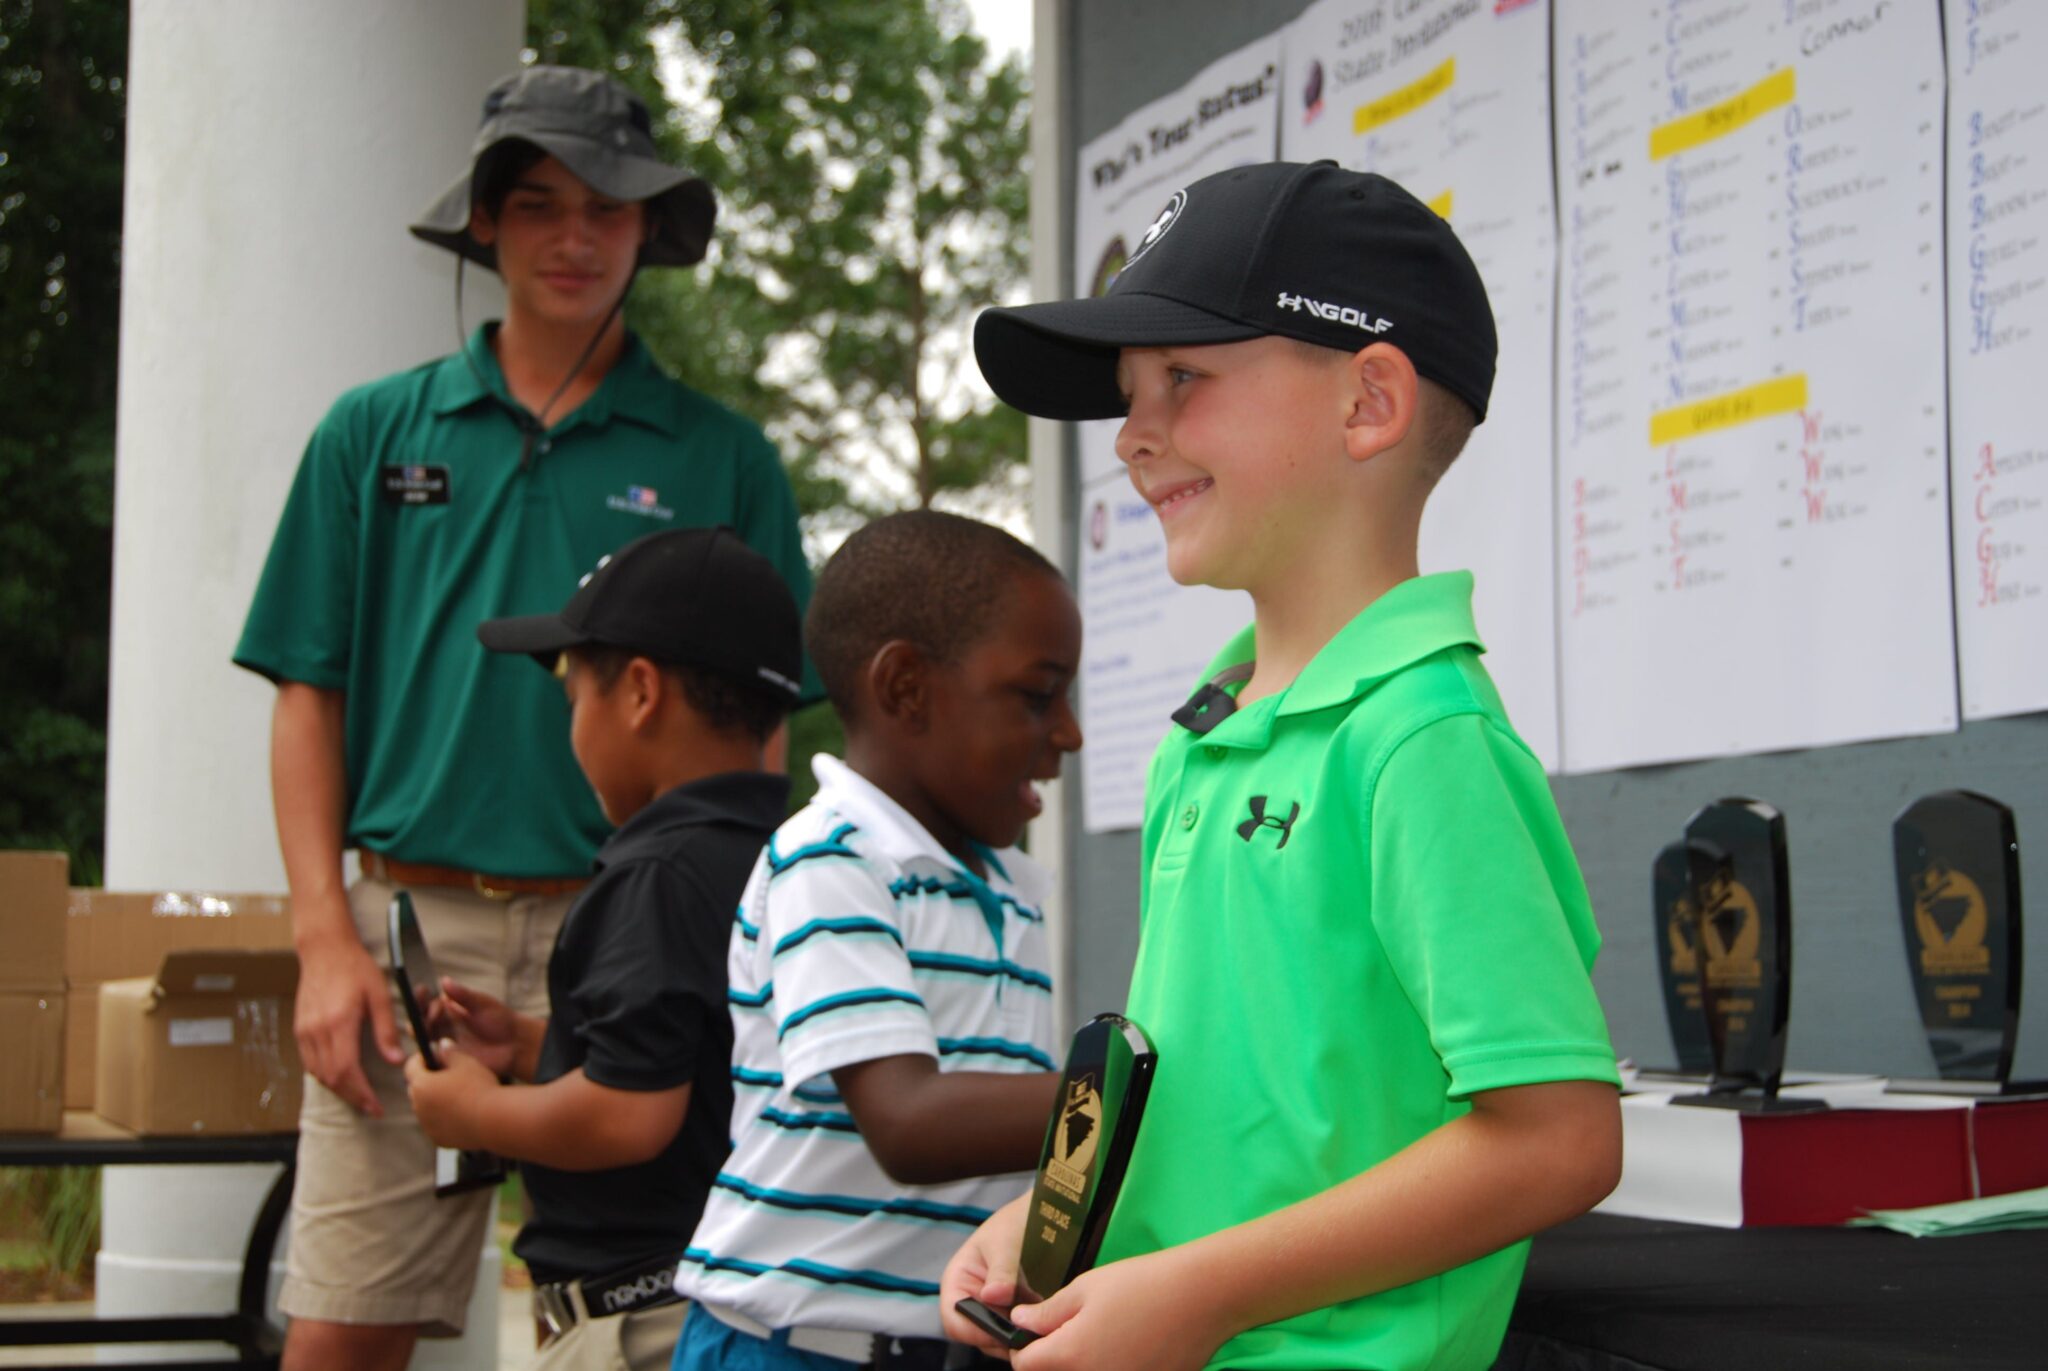 The U.S. Kids Golf tournament attracted participants from across the nation.